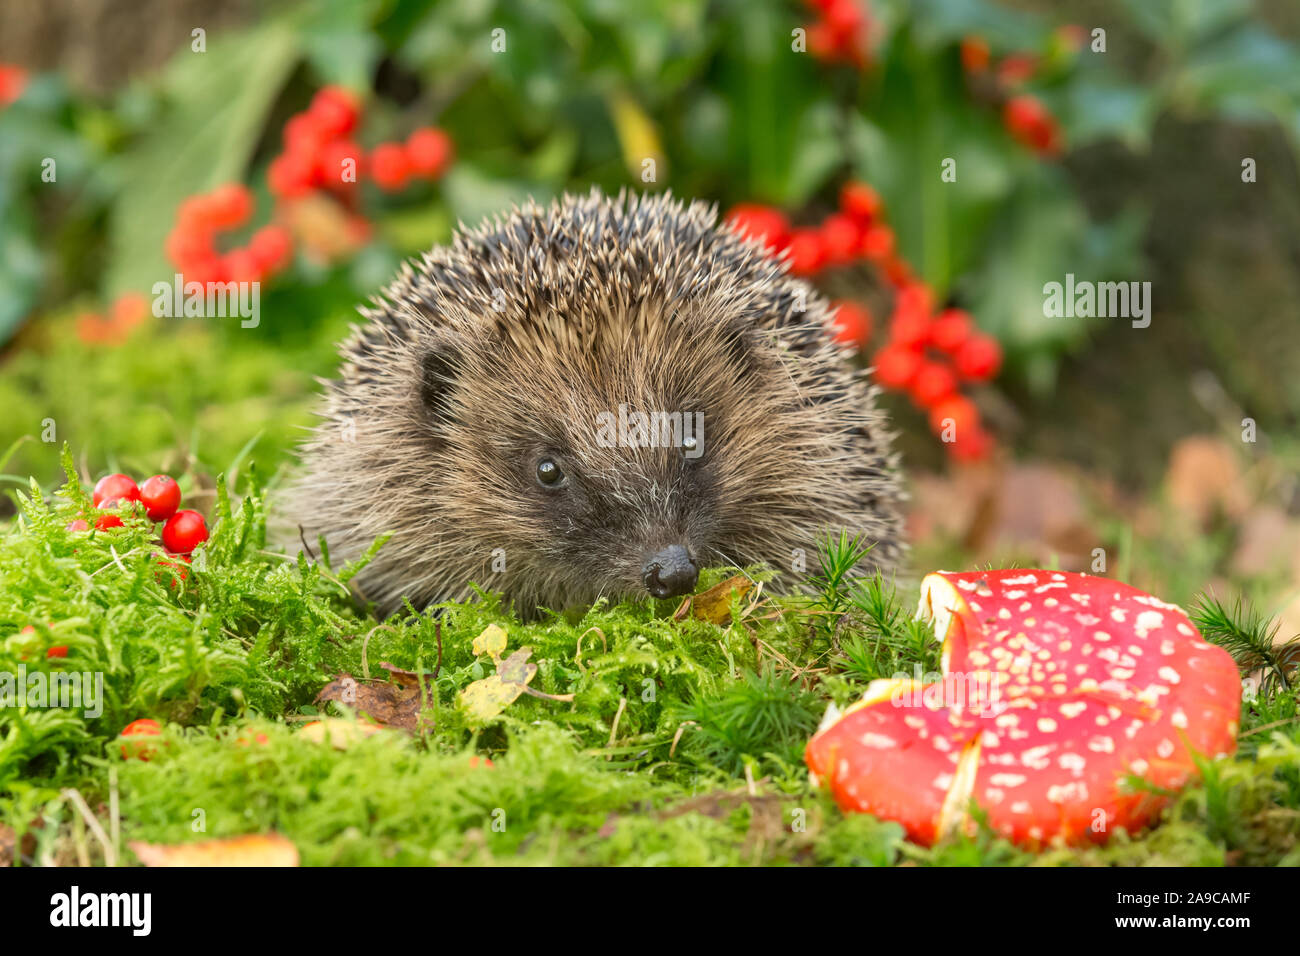 Hedgehog, (Scientific name: Erinaceus Europaeus) wild, native, European hedgehog with red Fly Agaric toadstool, red Holly berries and green moss. Stock Photo